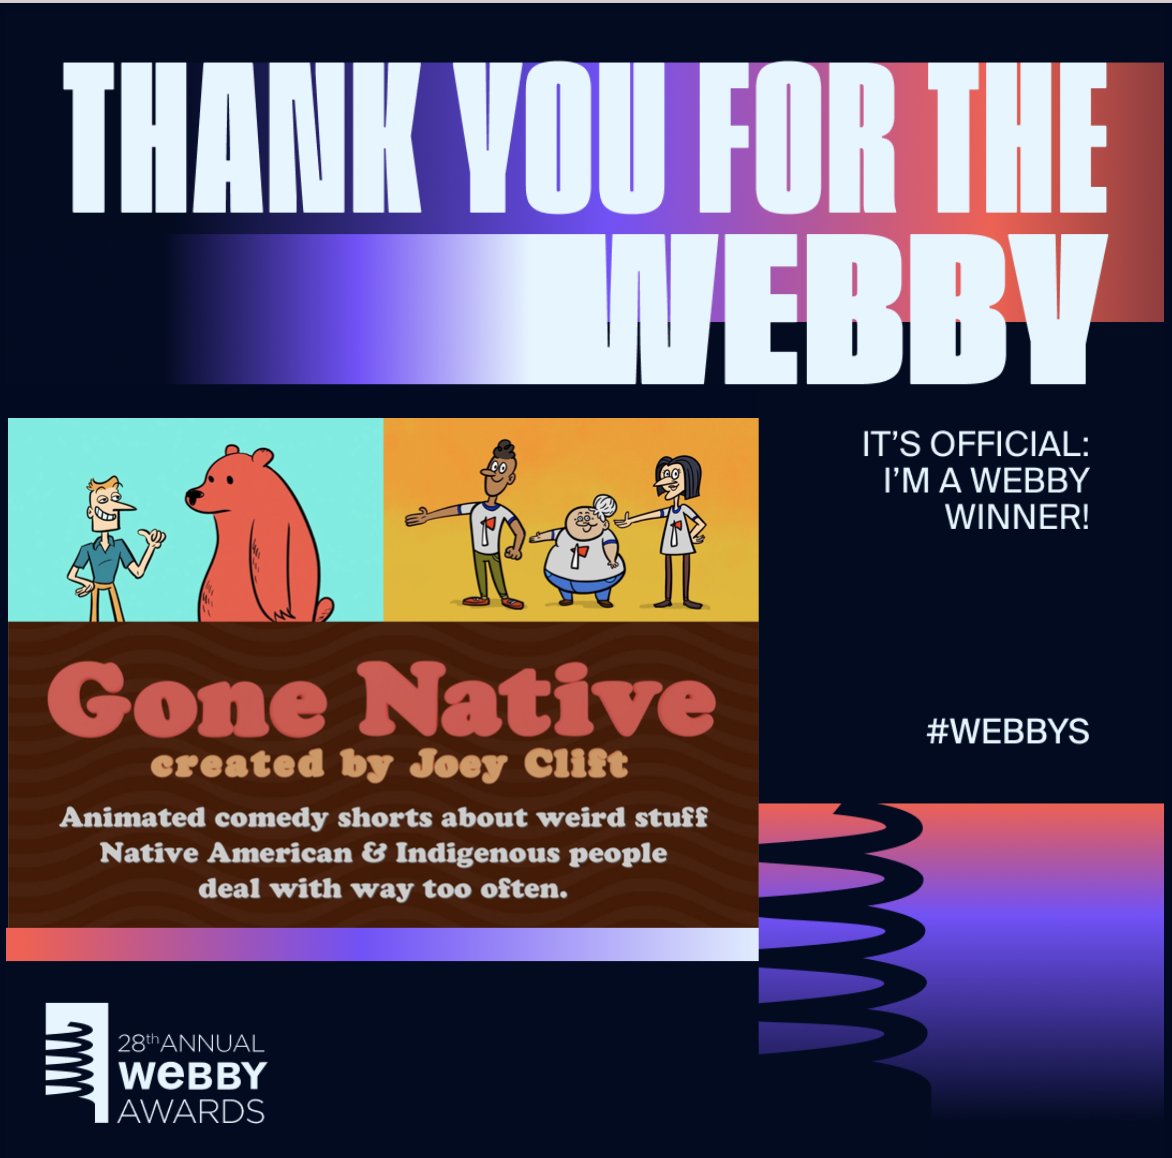 I can’t believe this happened. Gone Native won a Webby! I’m so proud that a short film about bears I made for fun in 2018 has blossomed into this cool thing. Thanks to everyone who helped make it happen and to my community for lifting me up at every step! @TheWebbyAwards #WEBBYS